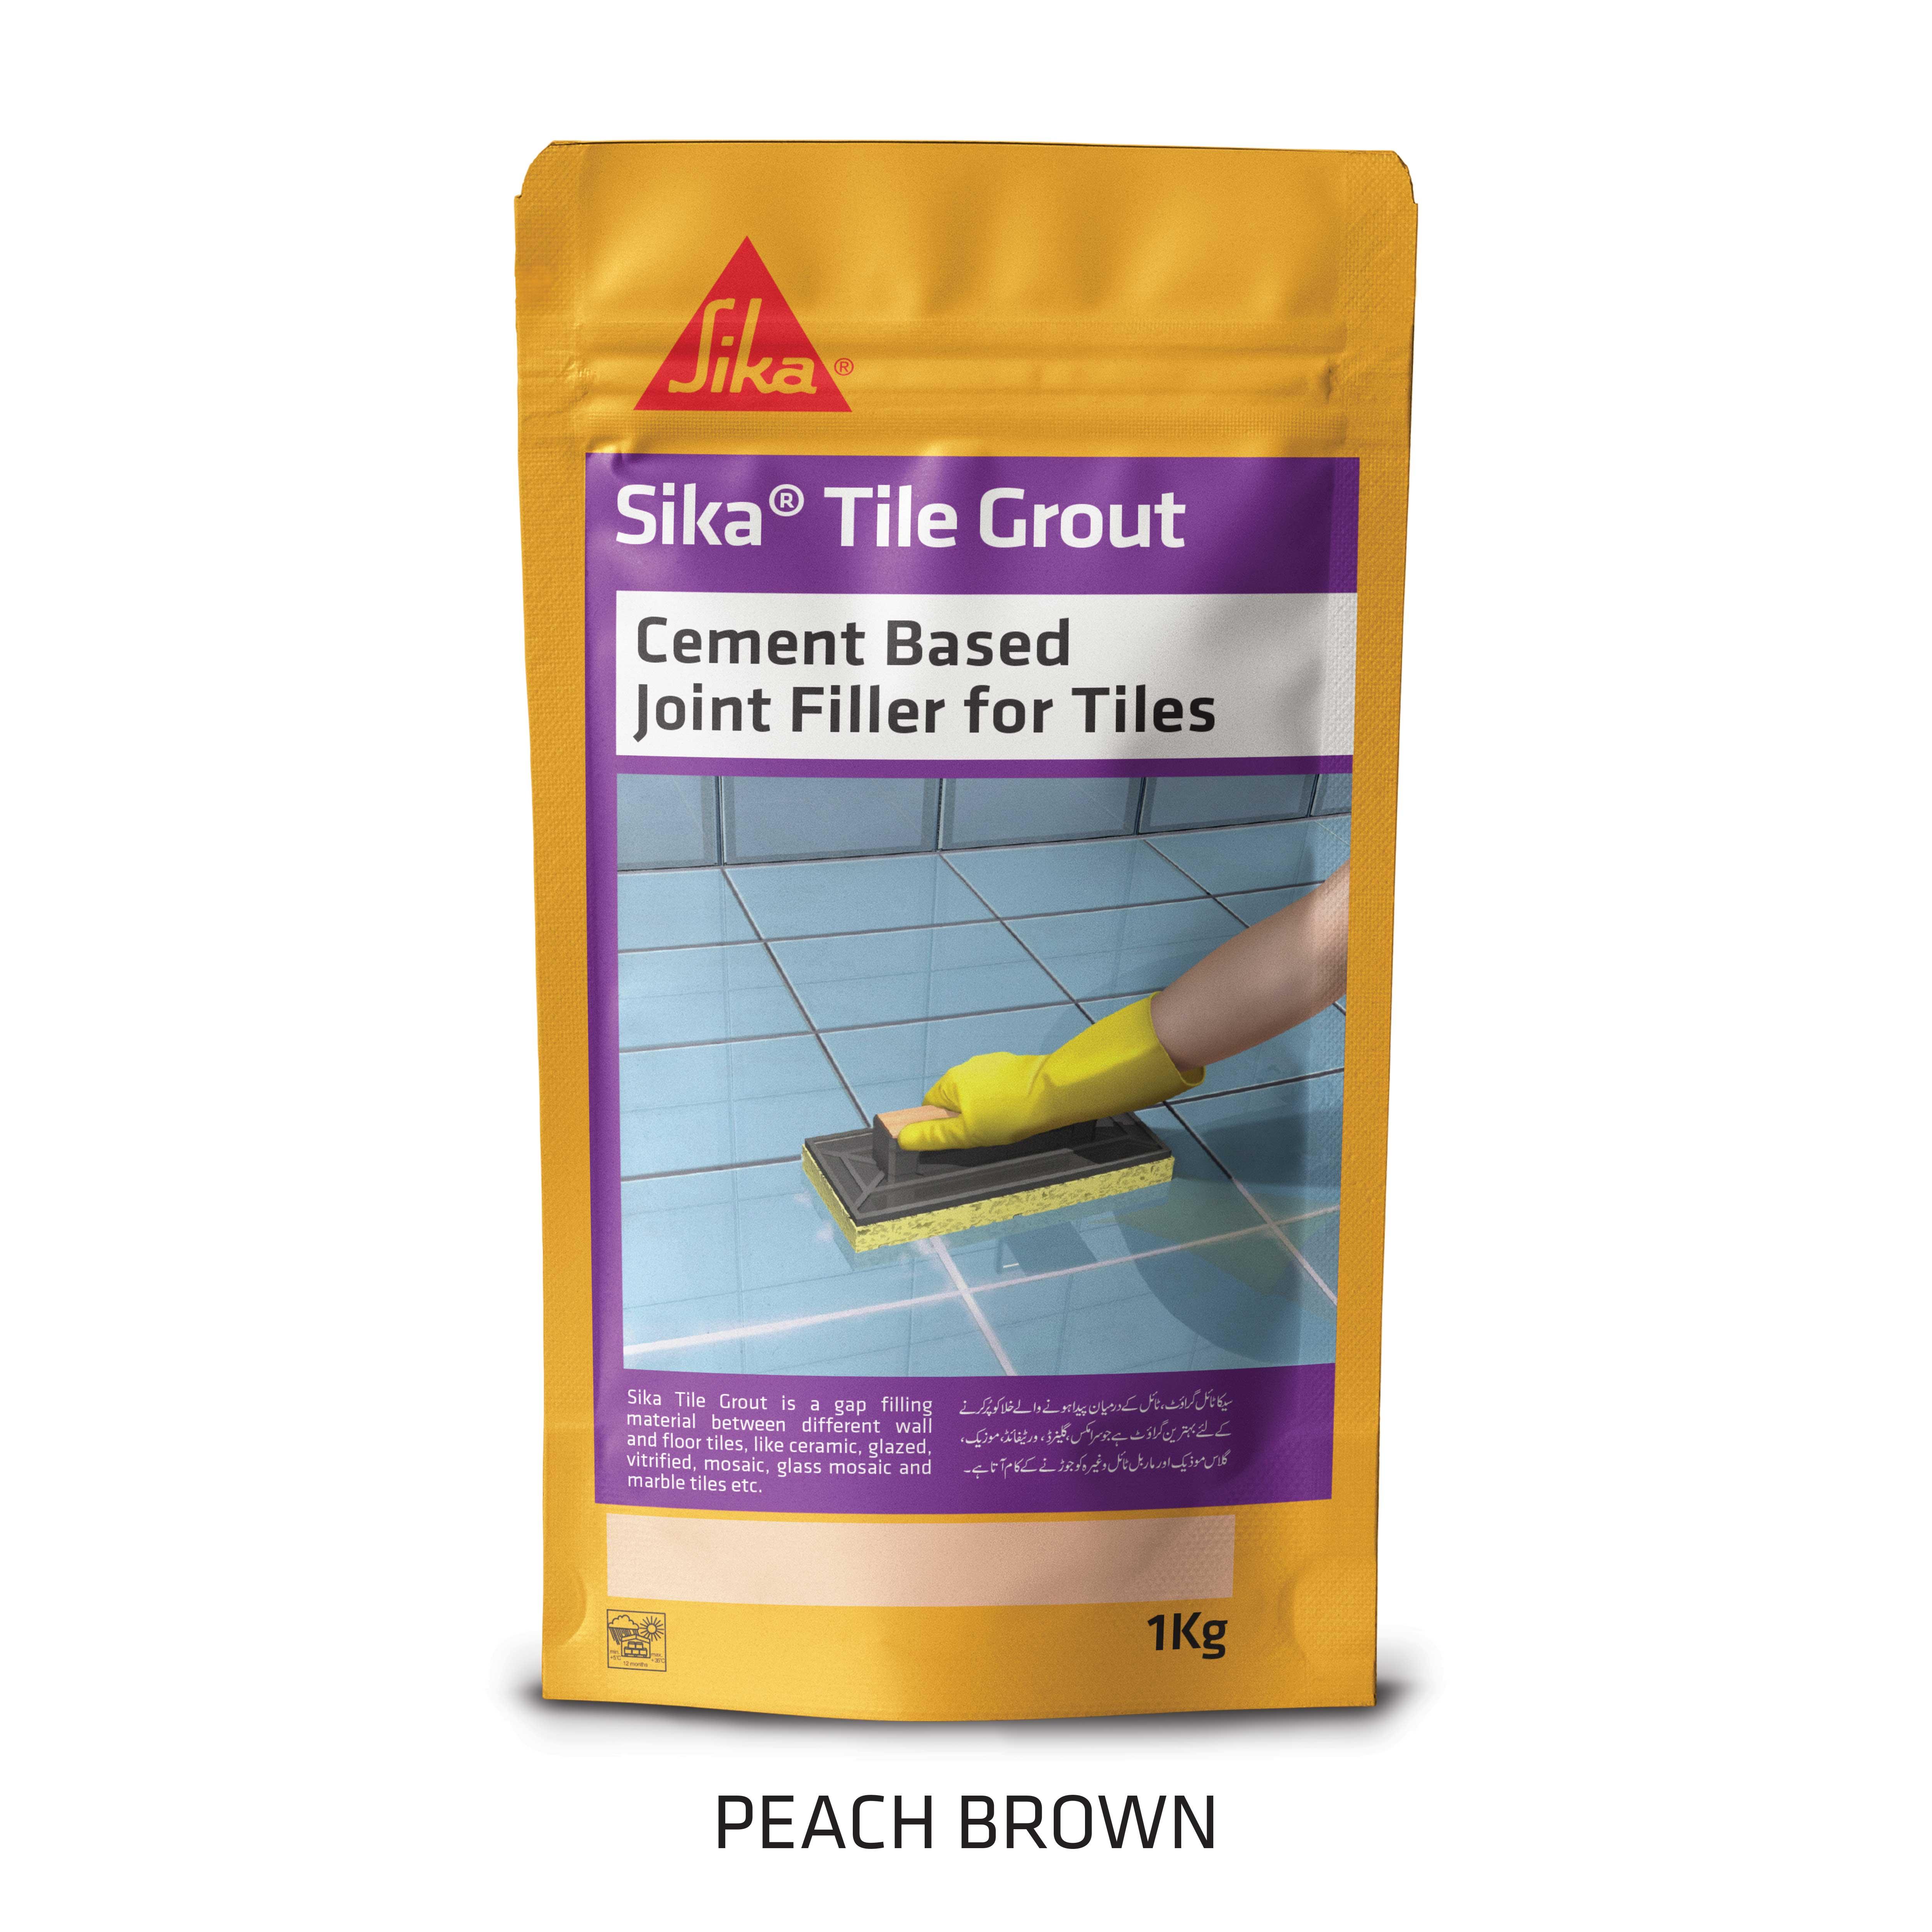 Sika Tile Grout Single Pouch Buy Online At Best Prices In Pakistan Daraz Pk